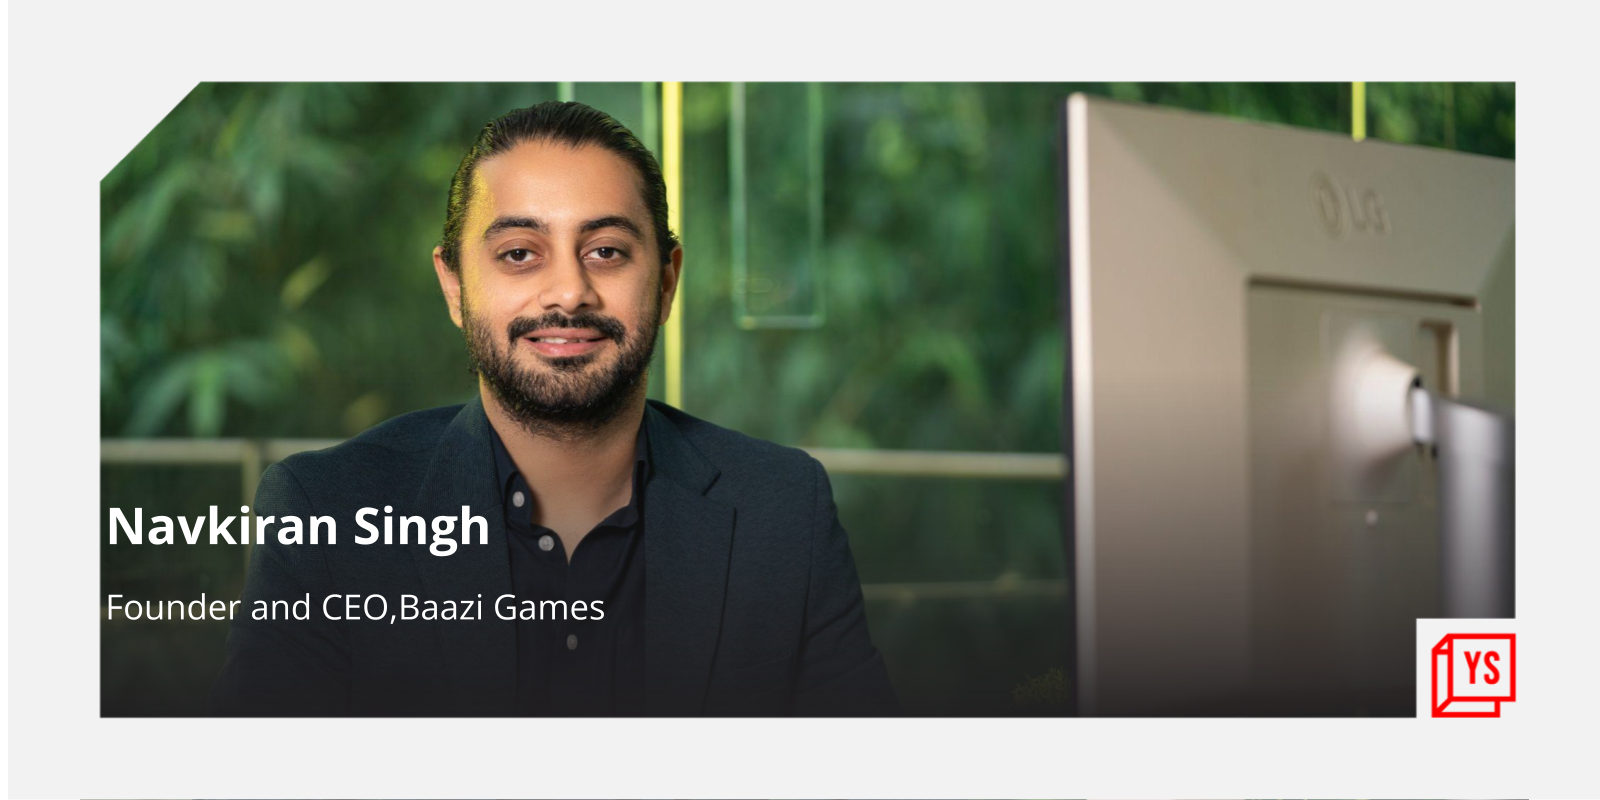 Playing the pandemic right: How gaming startup Baazi Games is riding the COVID-19 opportunities